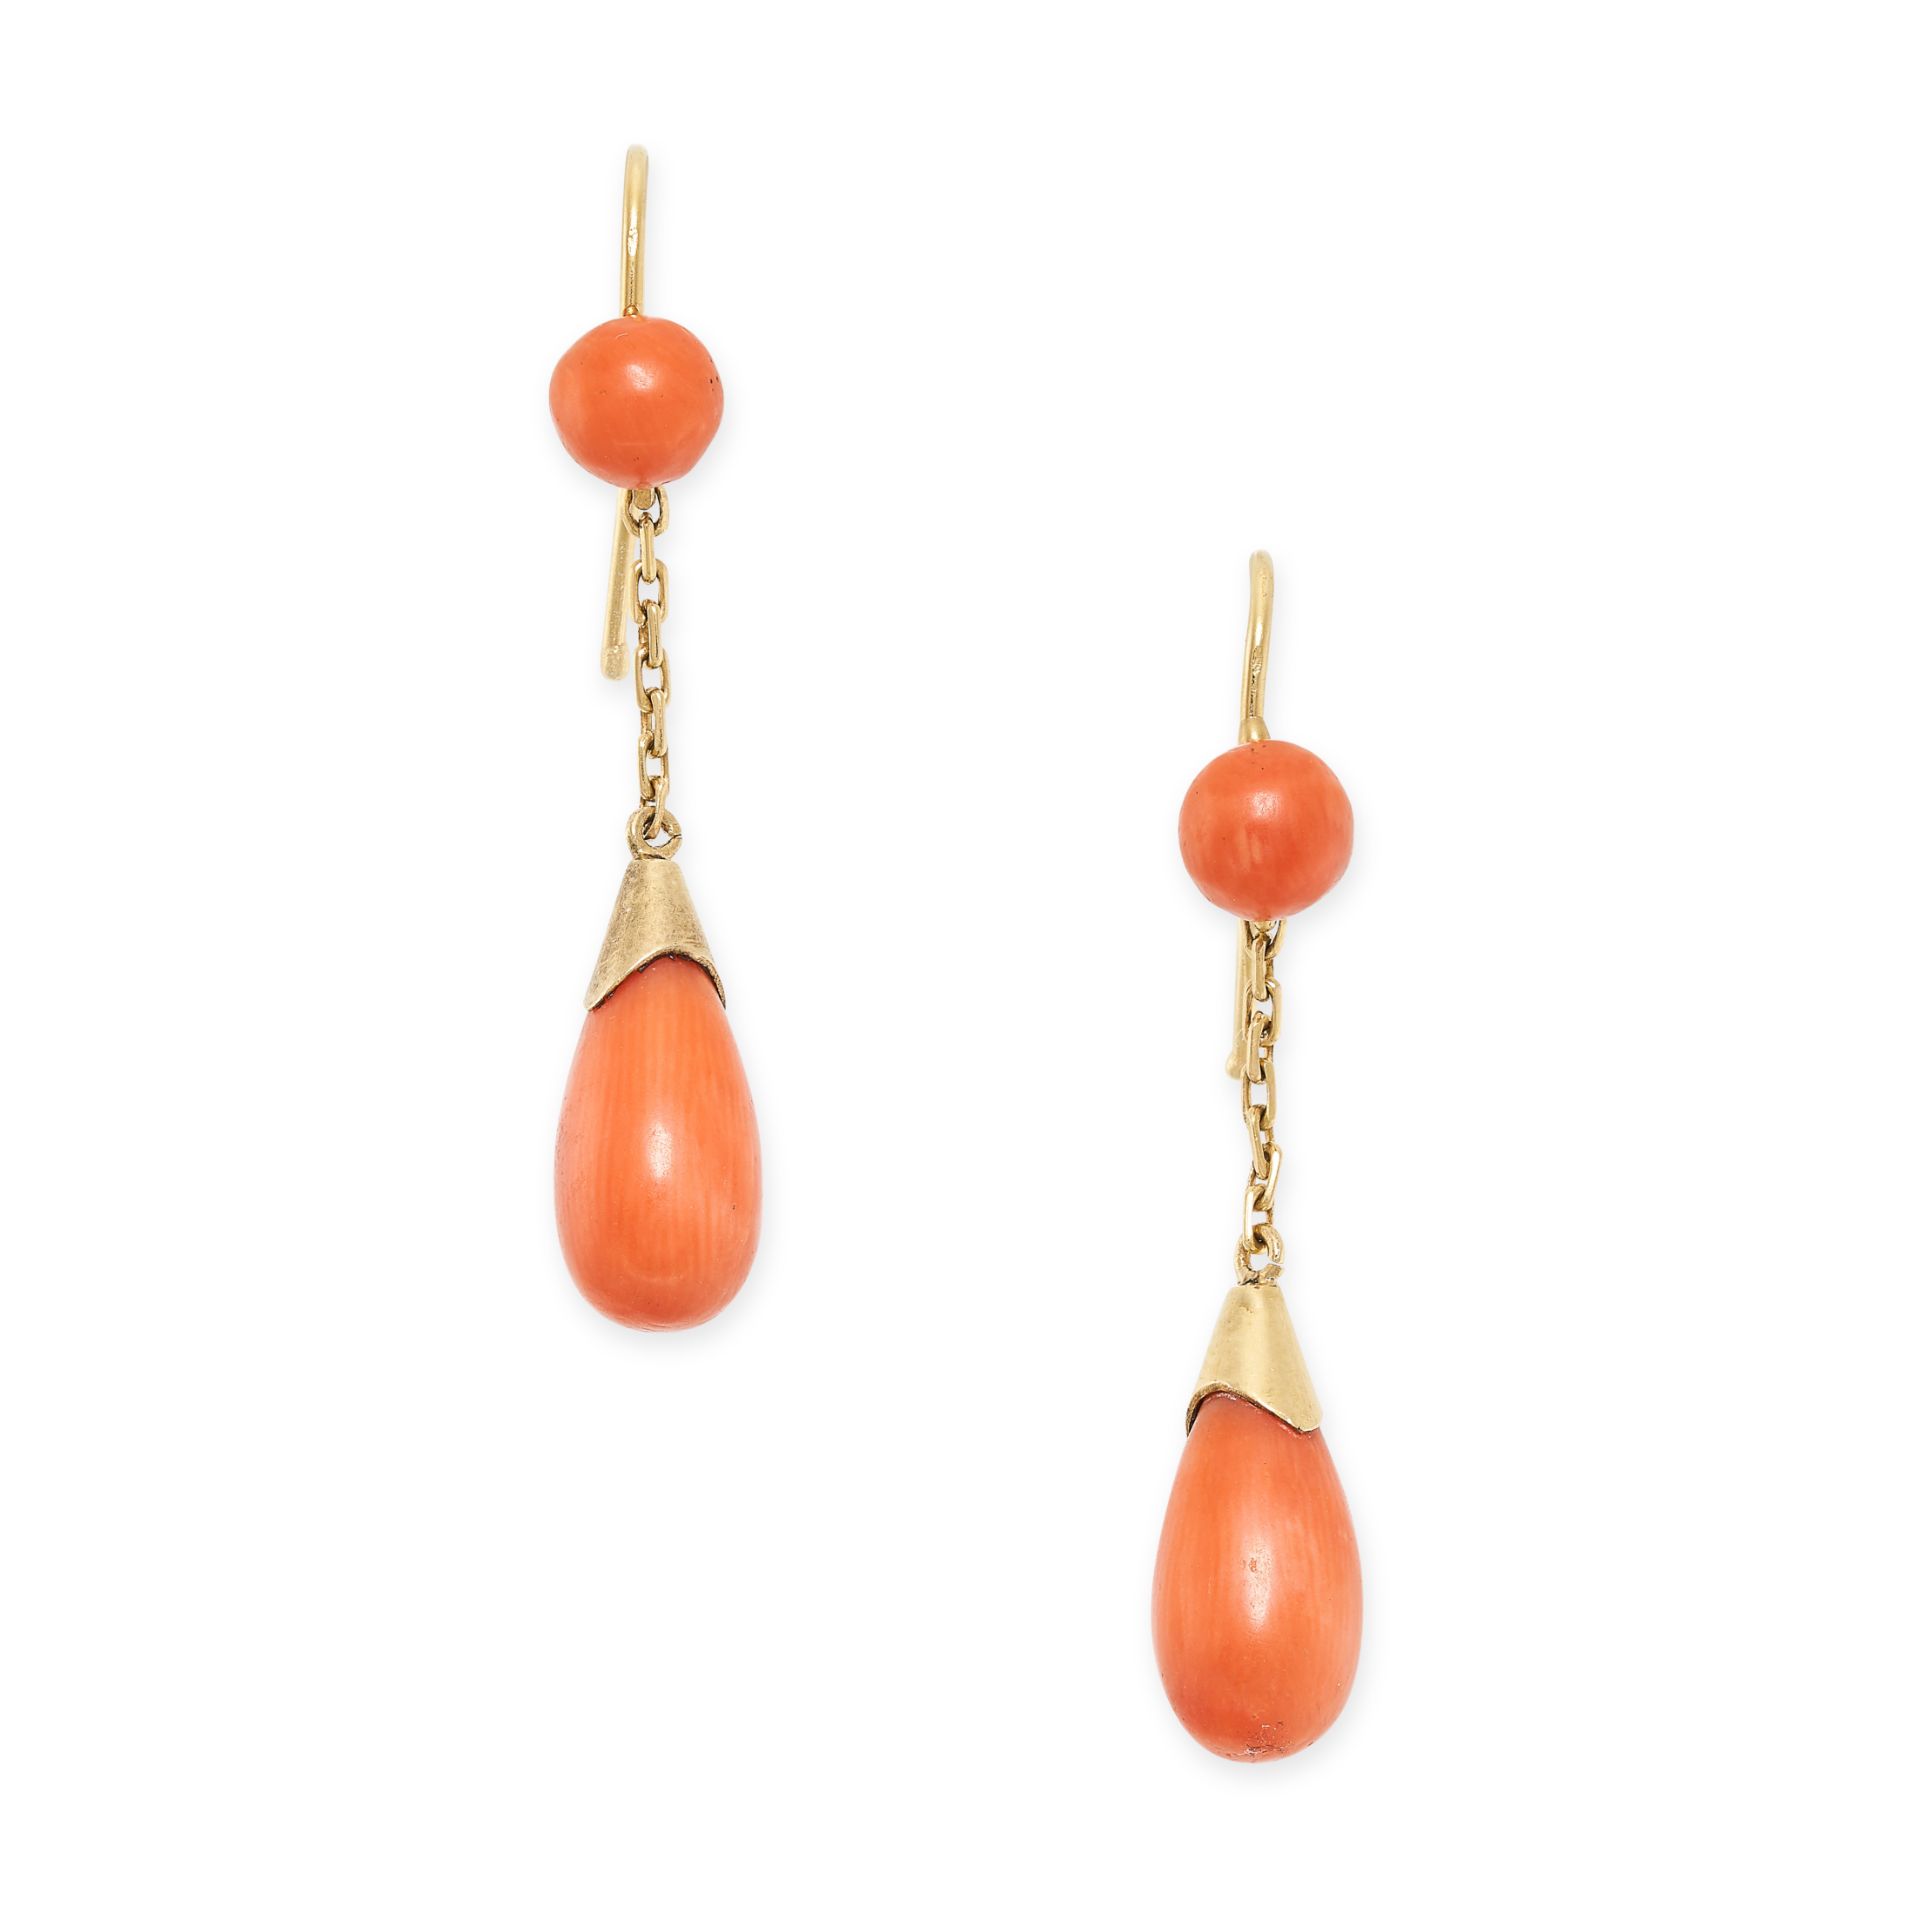 A PAIR OF ANTIQUE CORAL DROP EARRINGS in high carat yellow gold, each set with a polished tapering